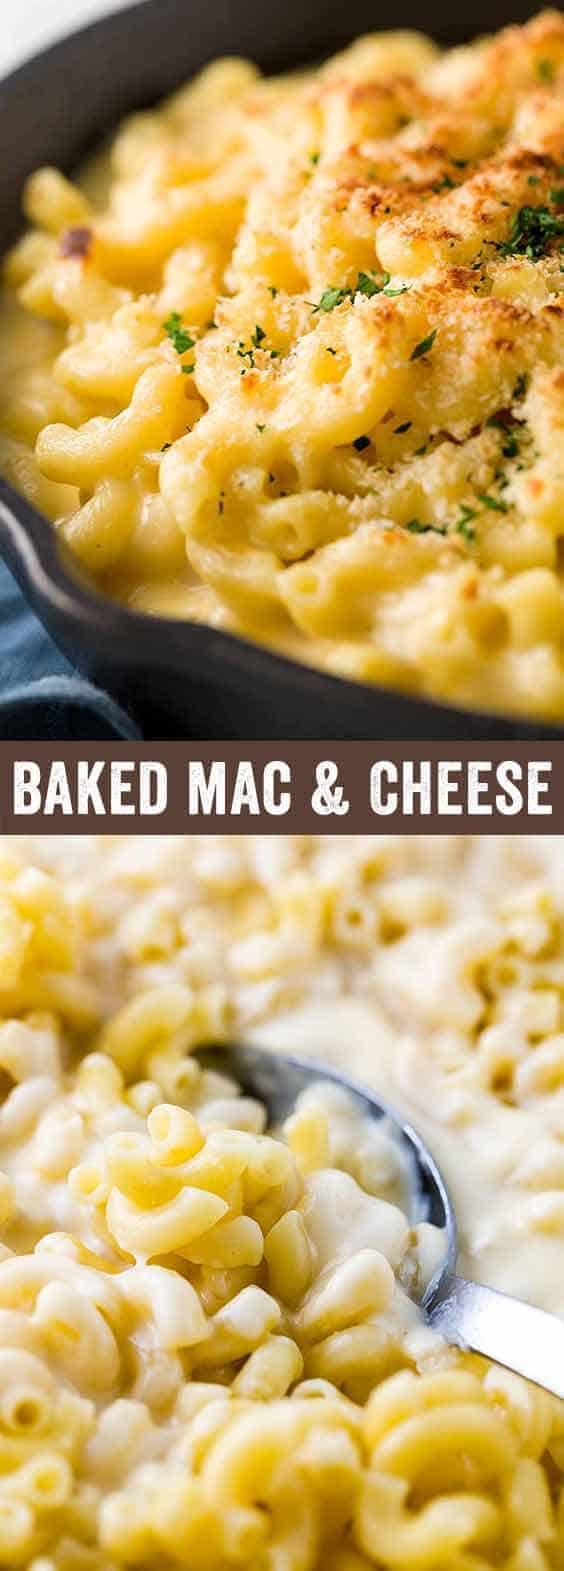 Recipes For Baked Mac And Cheese With Bread Crumbs
 Baked Macaroni and Cheese with Bread Crumb Topping